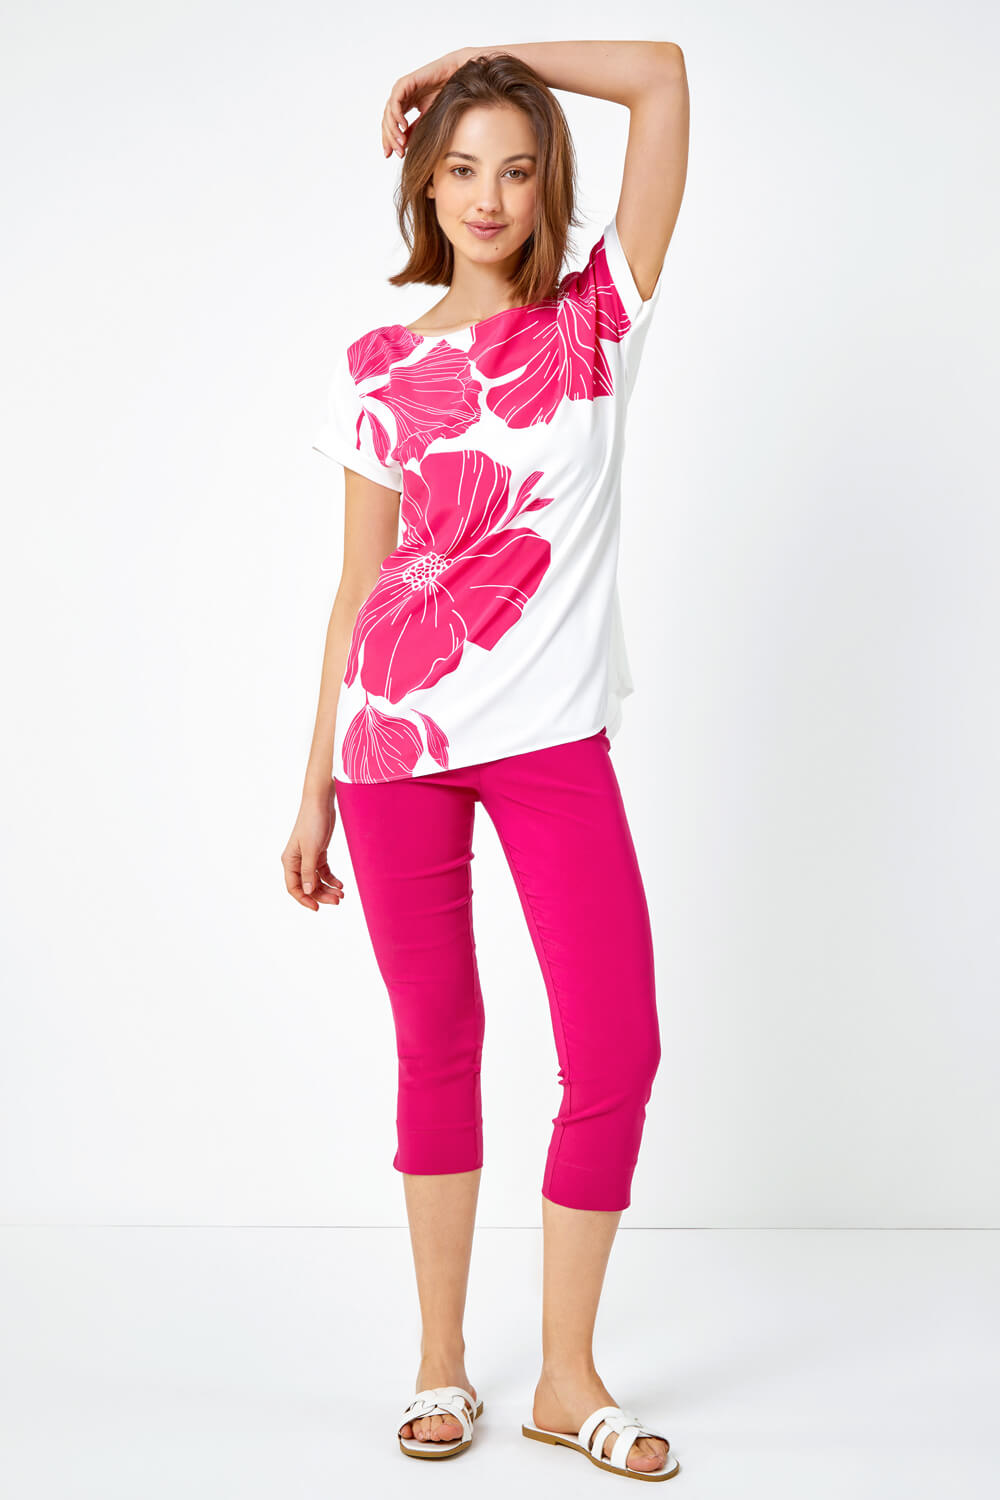 PINK Floral Print Stretch T-Shirt, Image 2 of 5